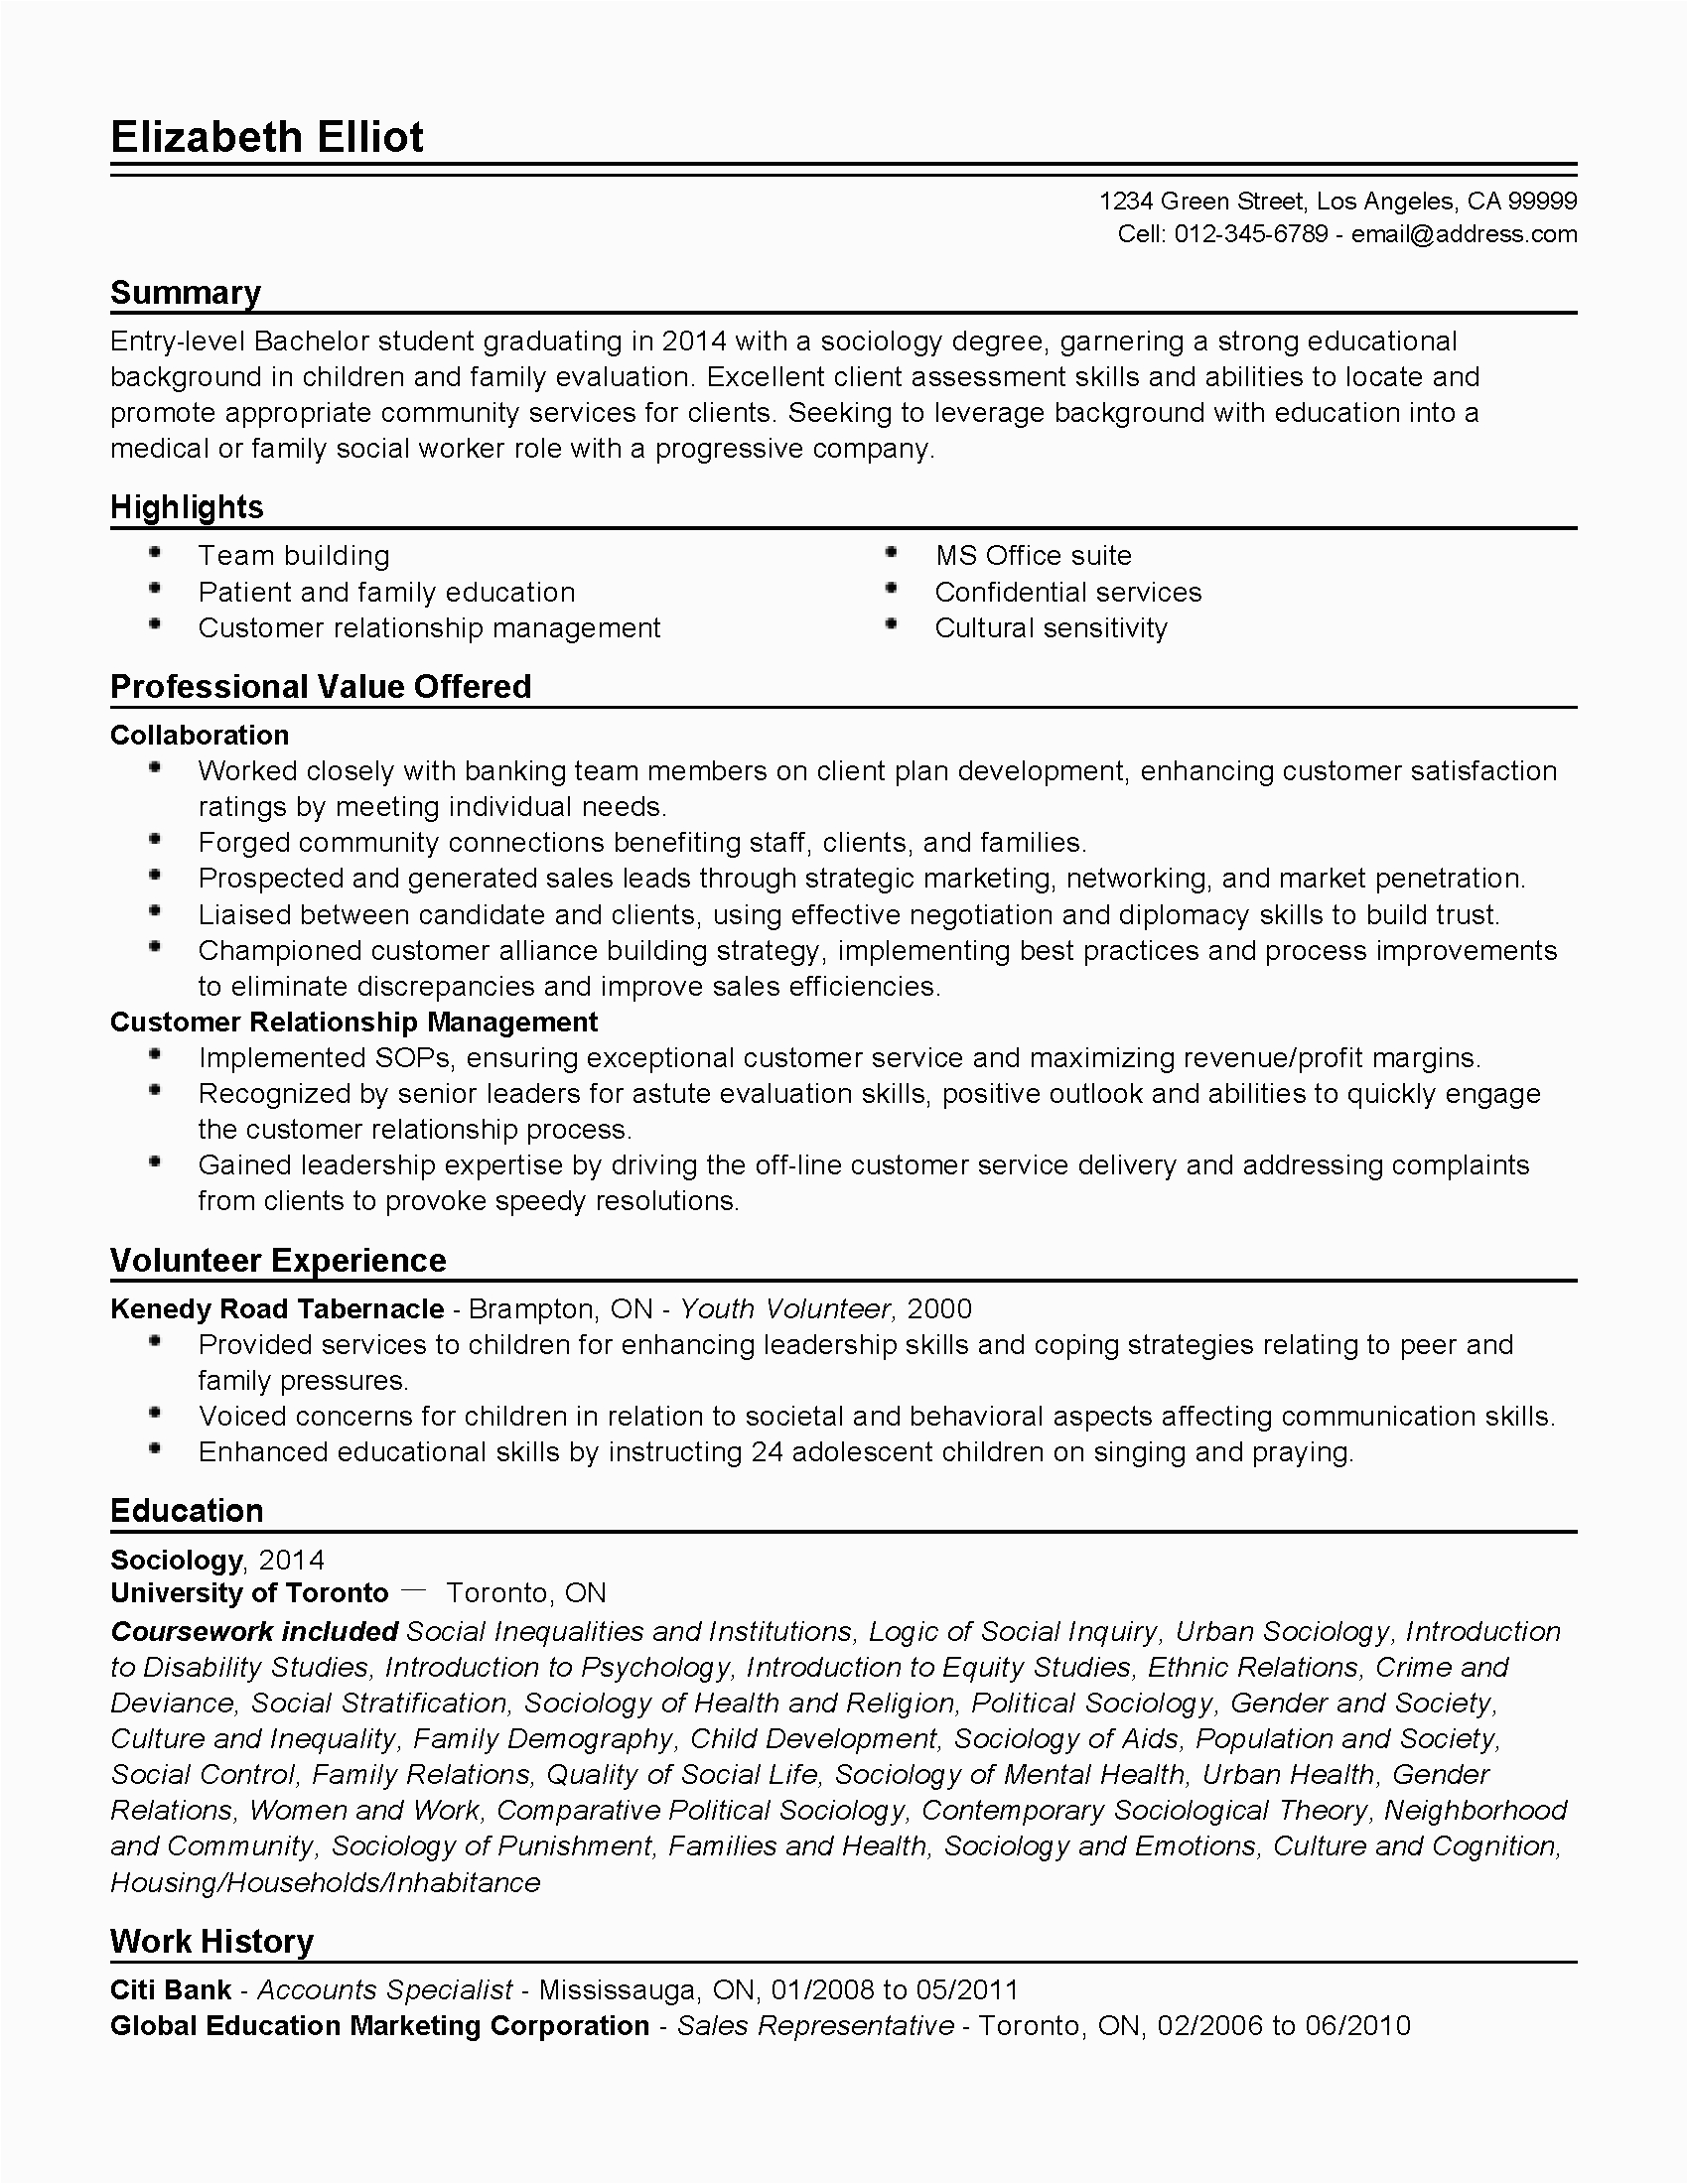 Entry Level Job Functional Resume Samples Professional Entry Level social Worker Templates to Showcase Your